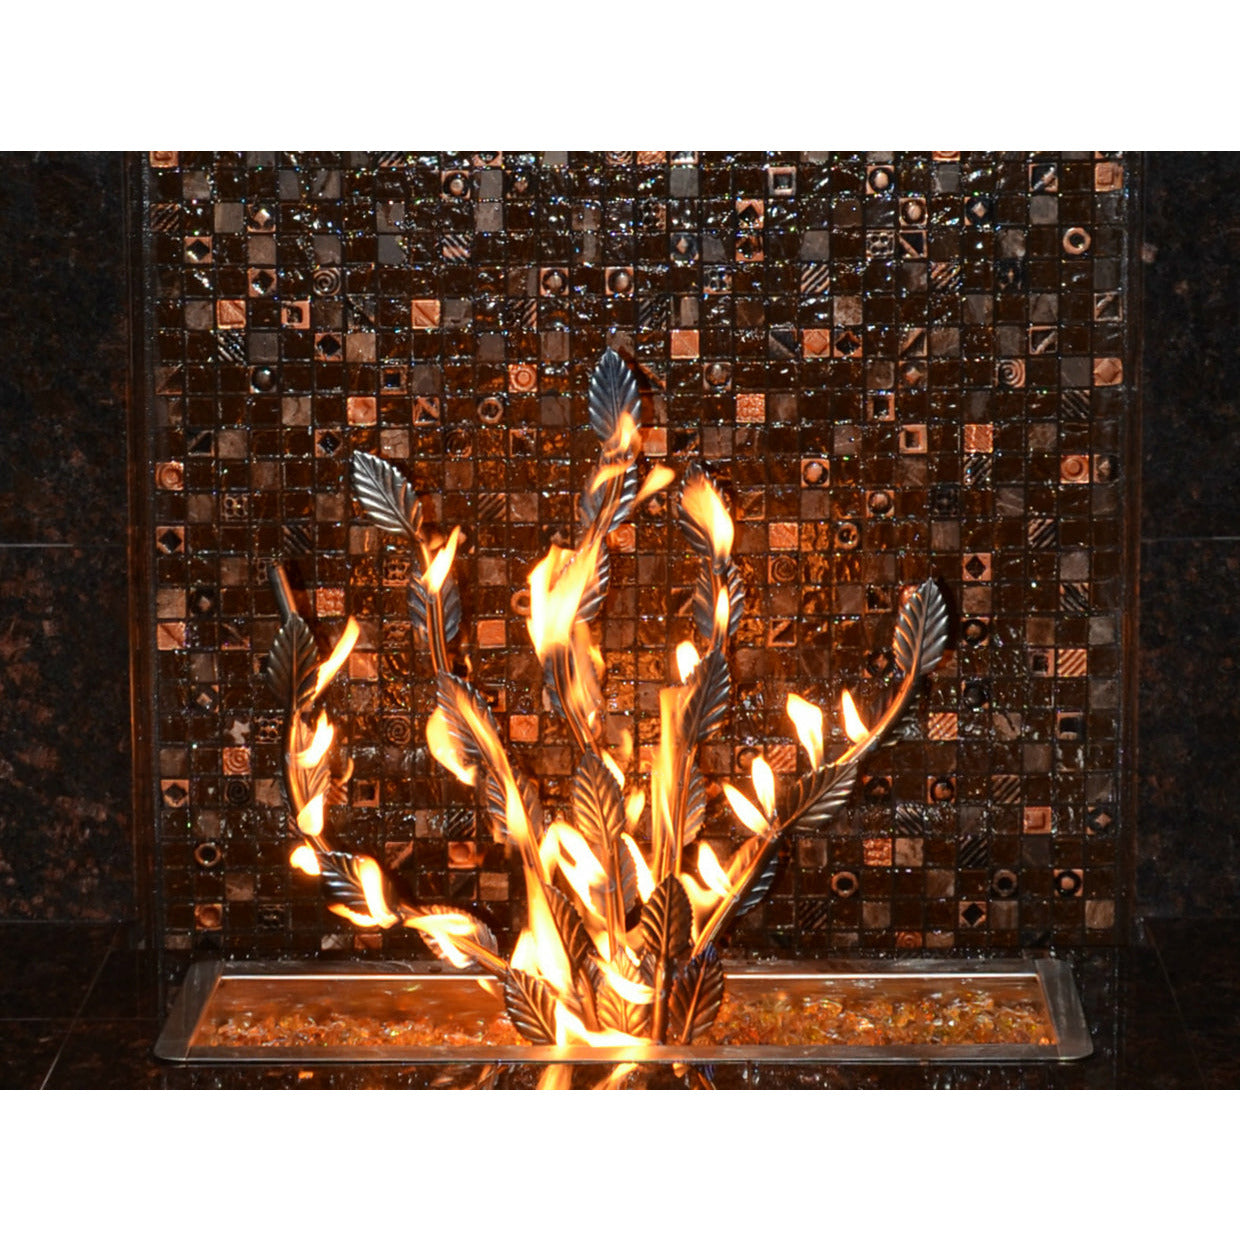 The Outdoor Plus STAINLESS STEEL FIRE TREE BURNER - OPT-3000